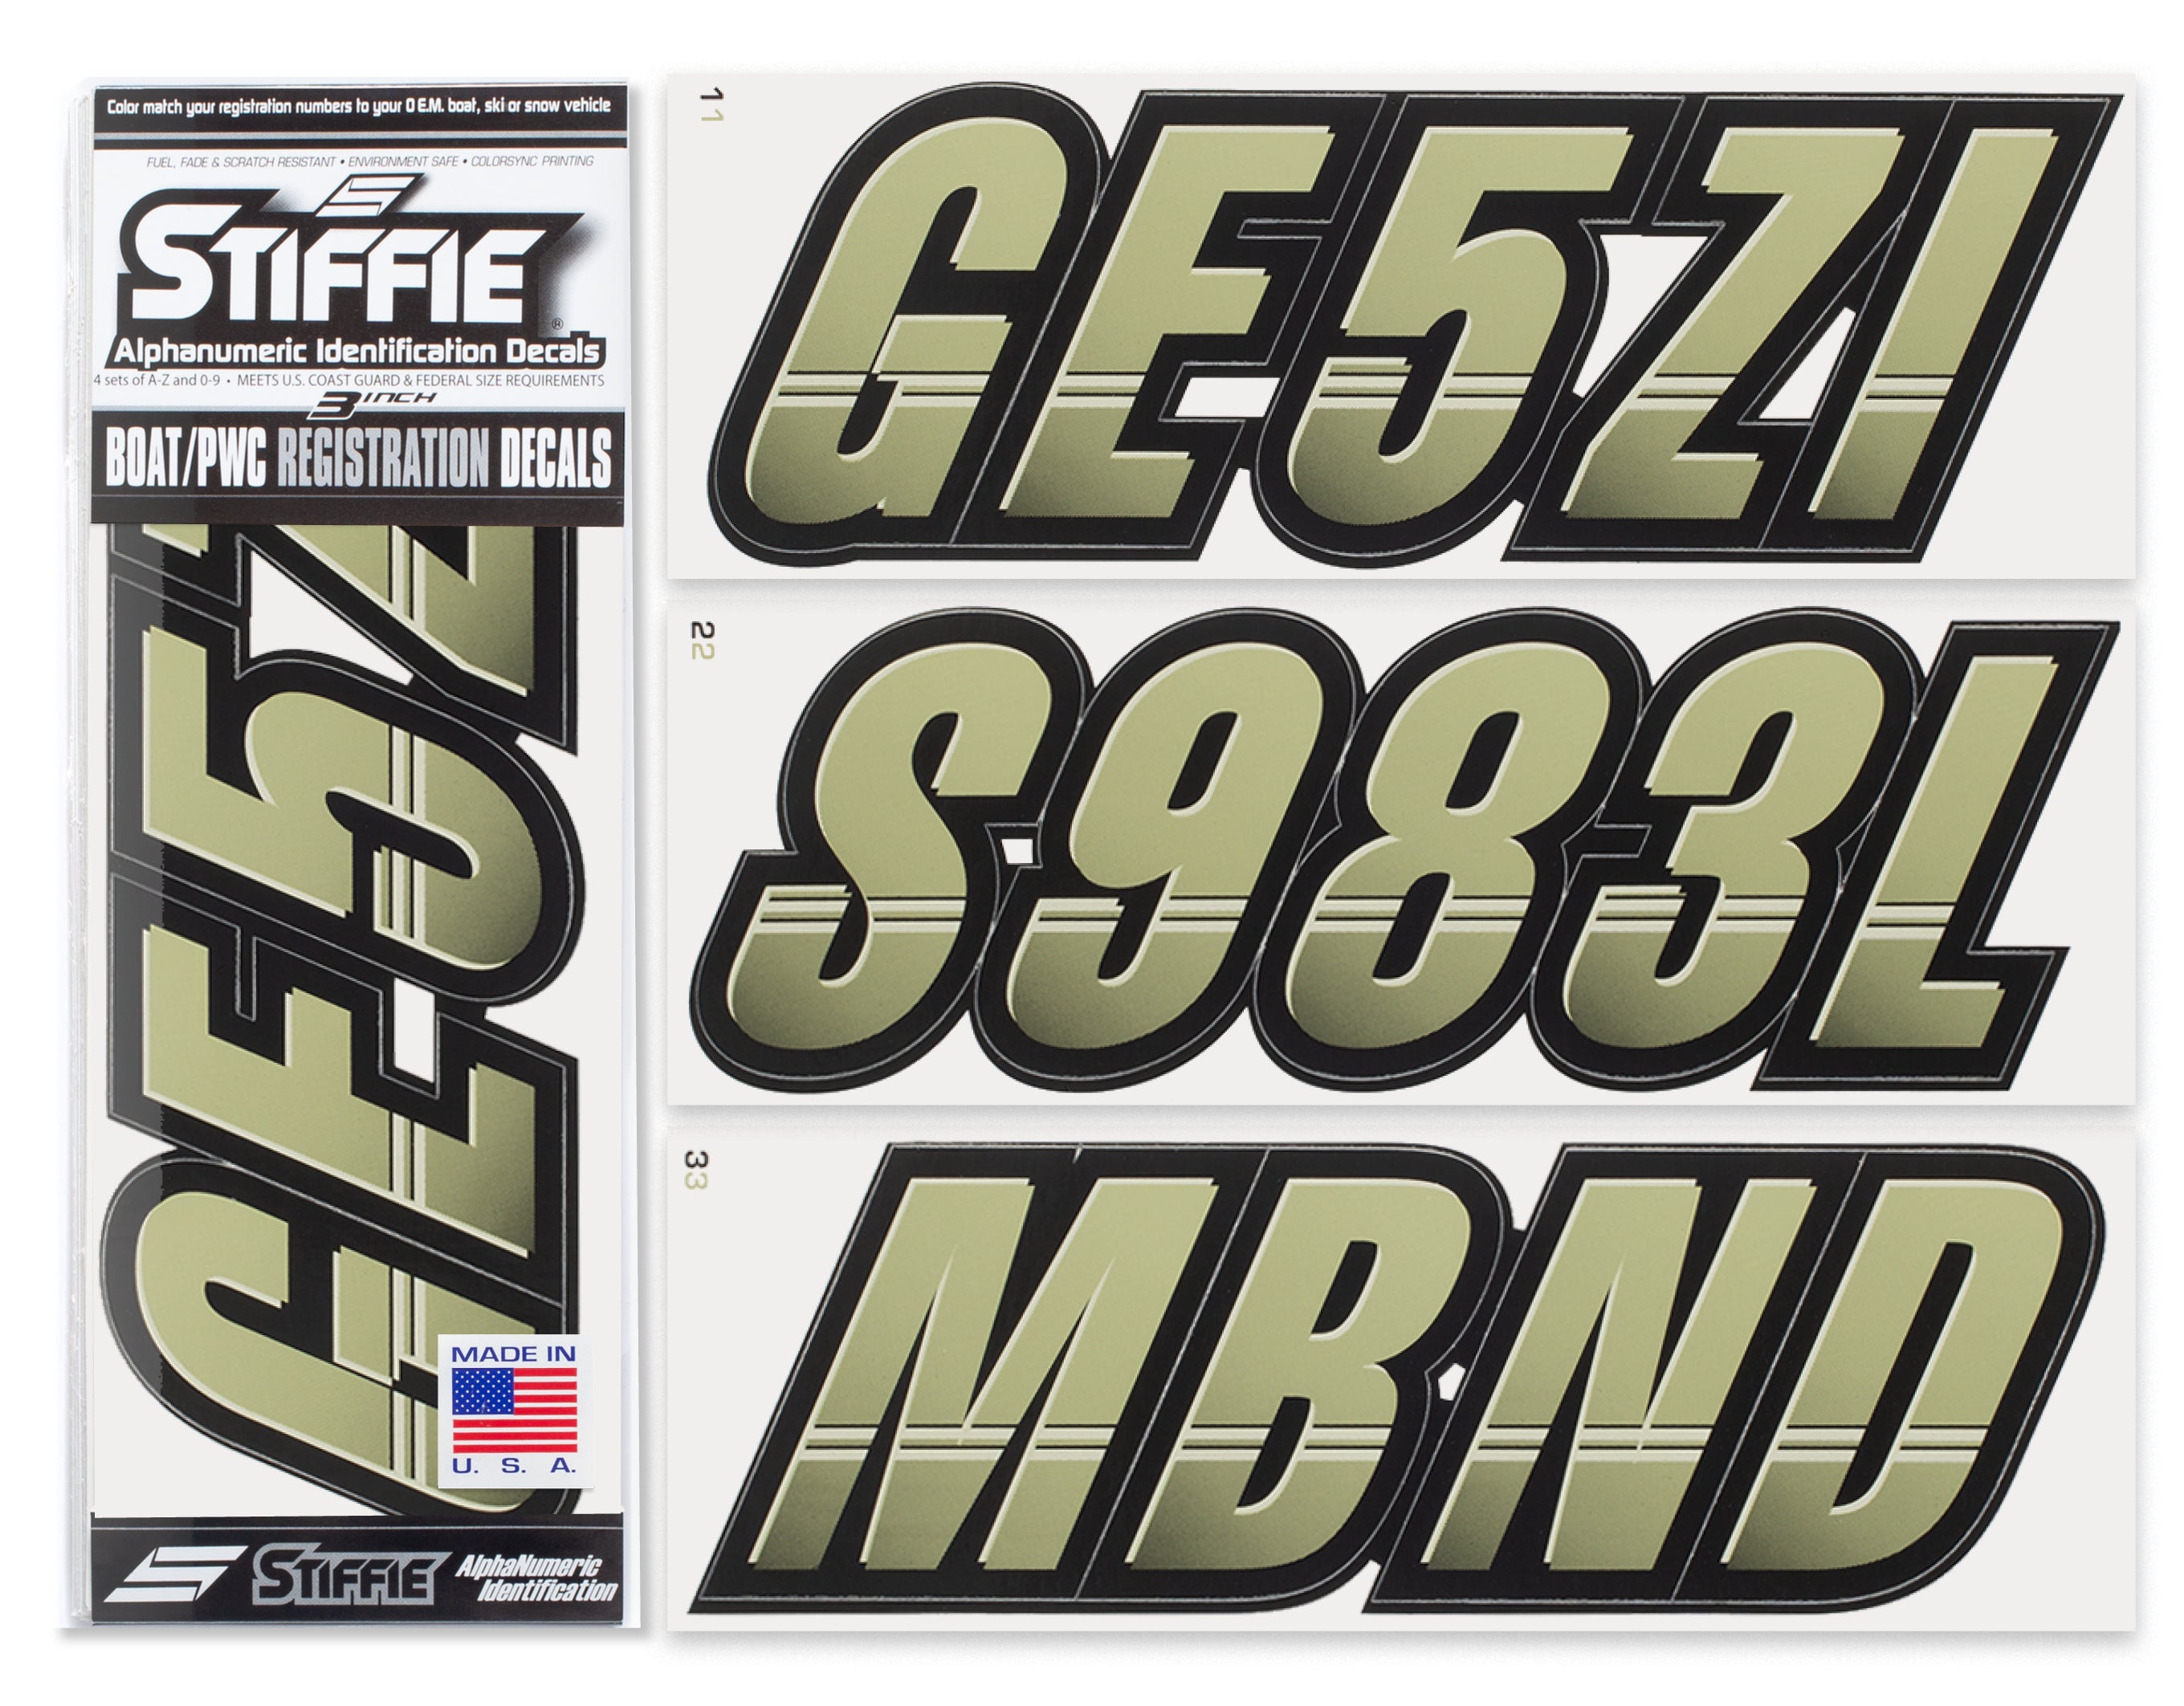 STIFFIE Techtron Moss/Black 3" Alpha-Numeric Registration Identification Numbers Stickers Decals for Boats & Personal Watercraft